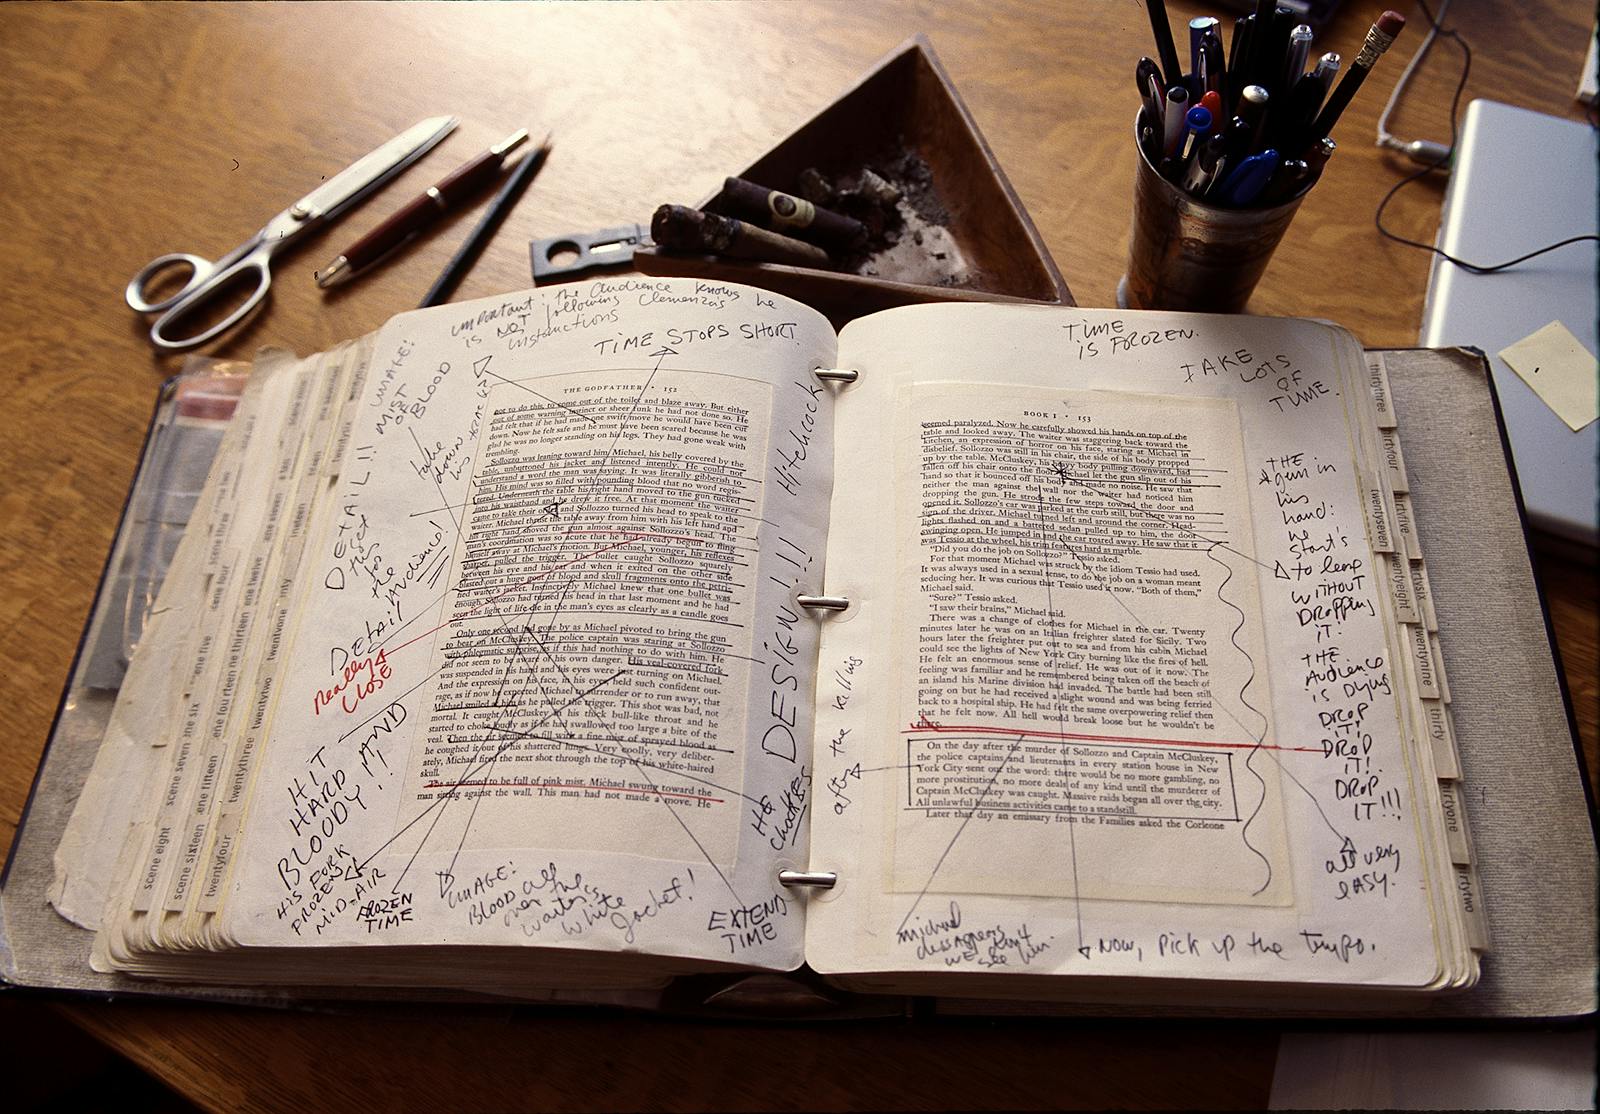 To plan the film, Coppola made extensive notes in a copy of Puzo's novel.